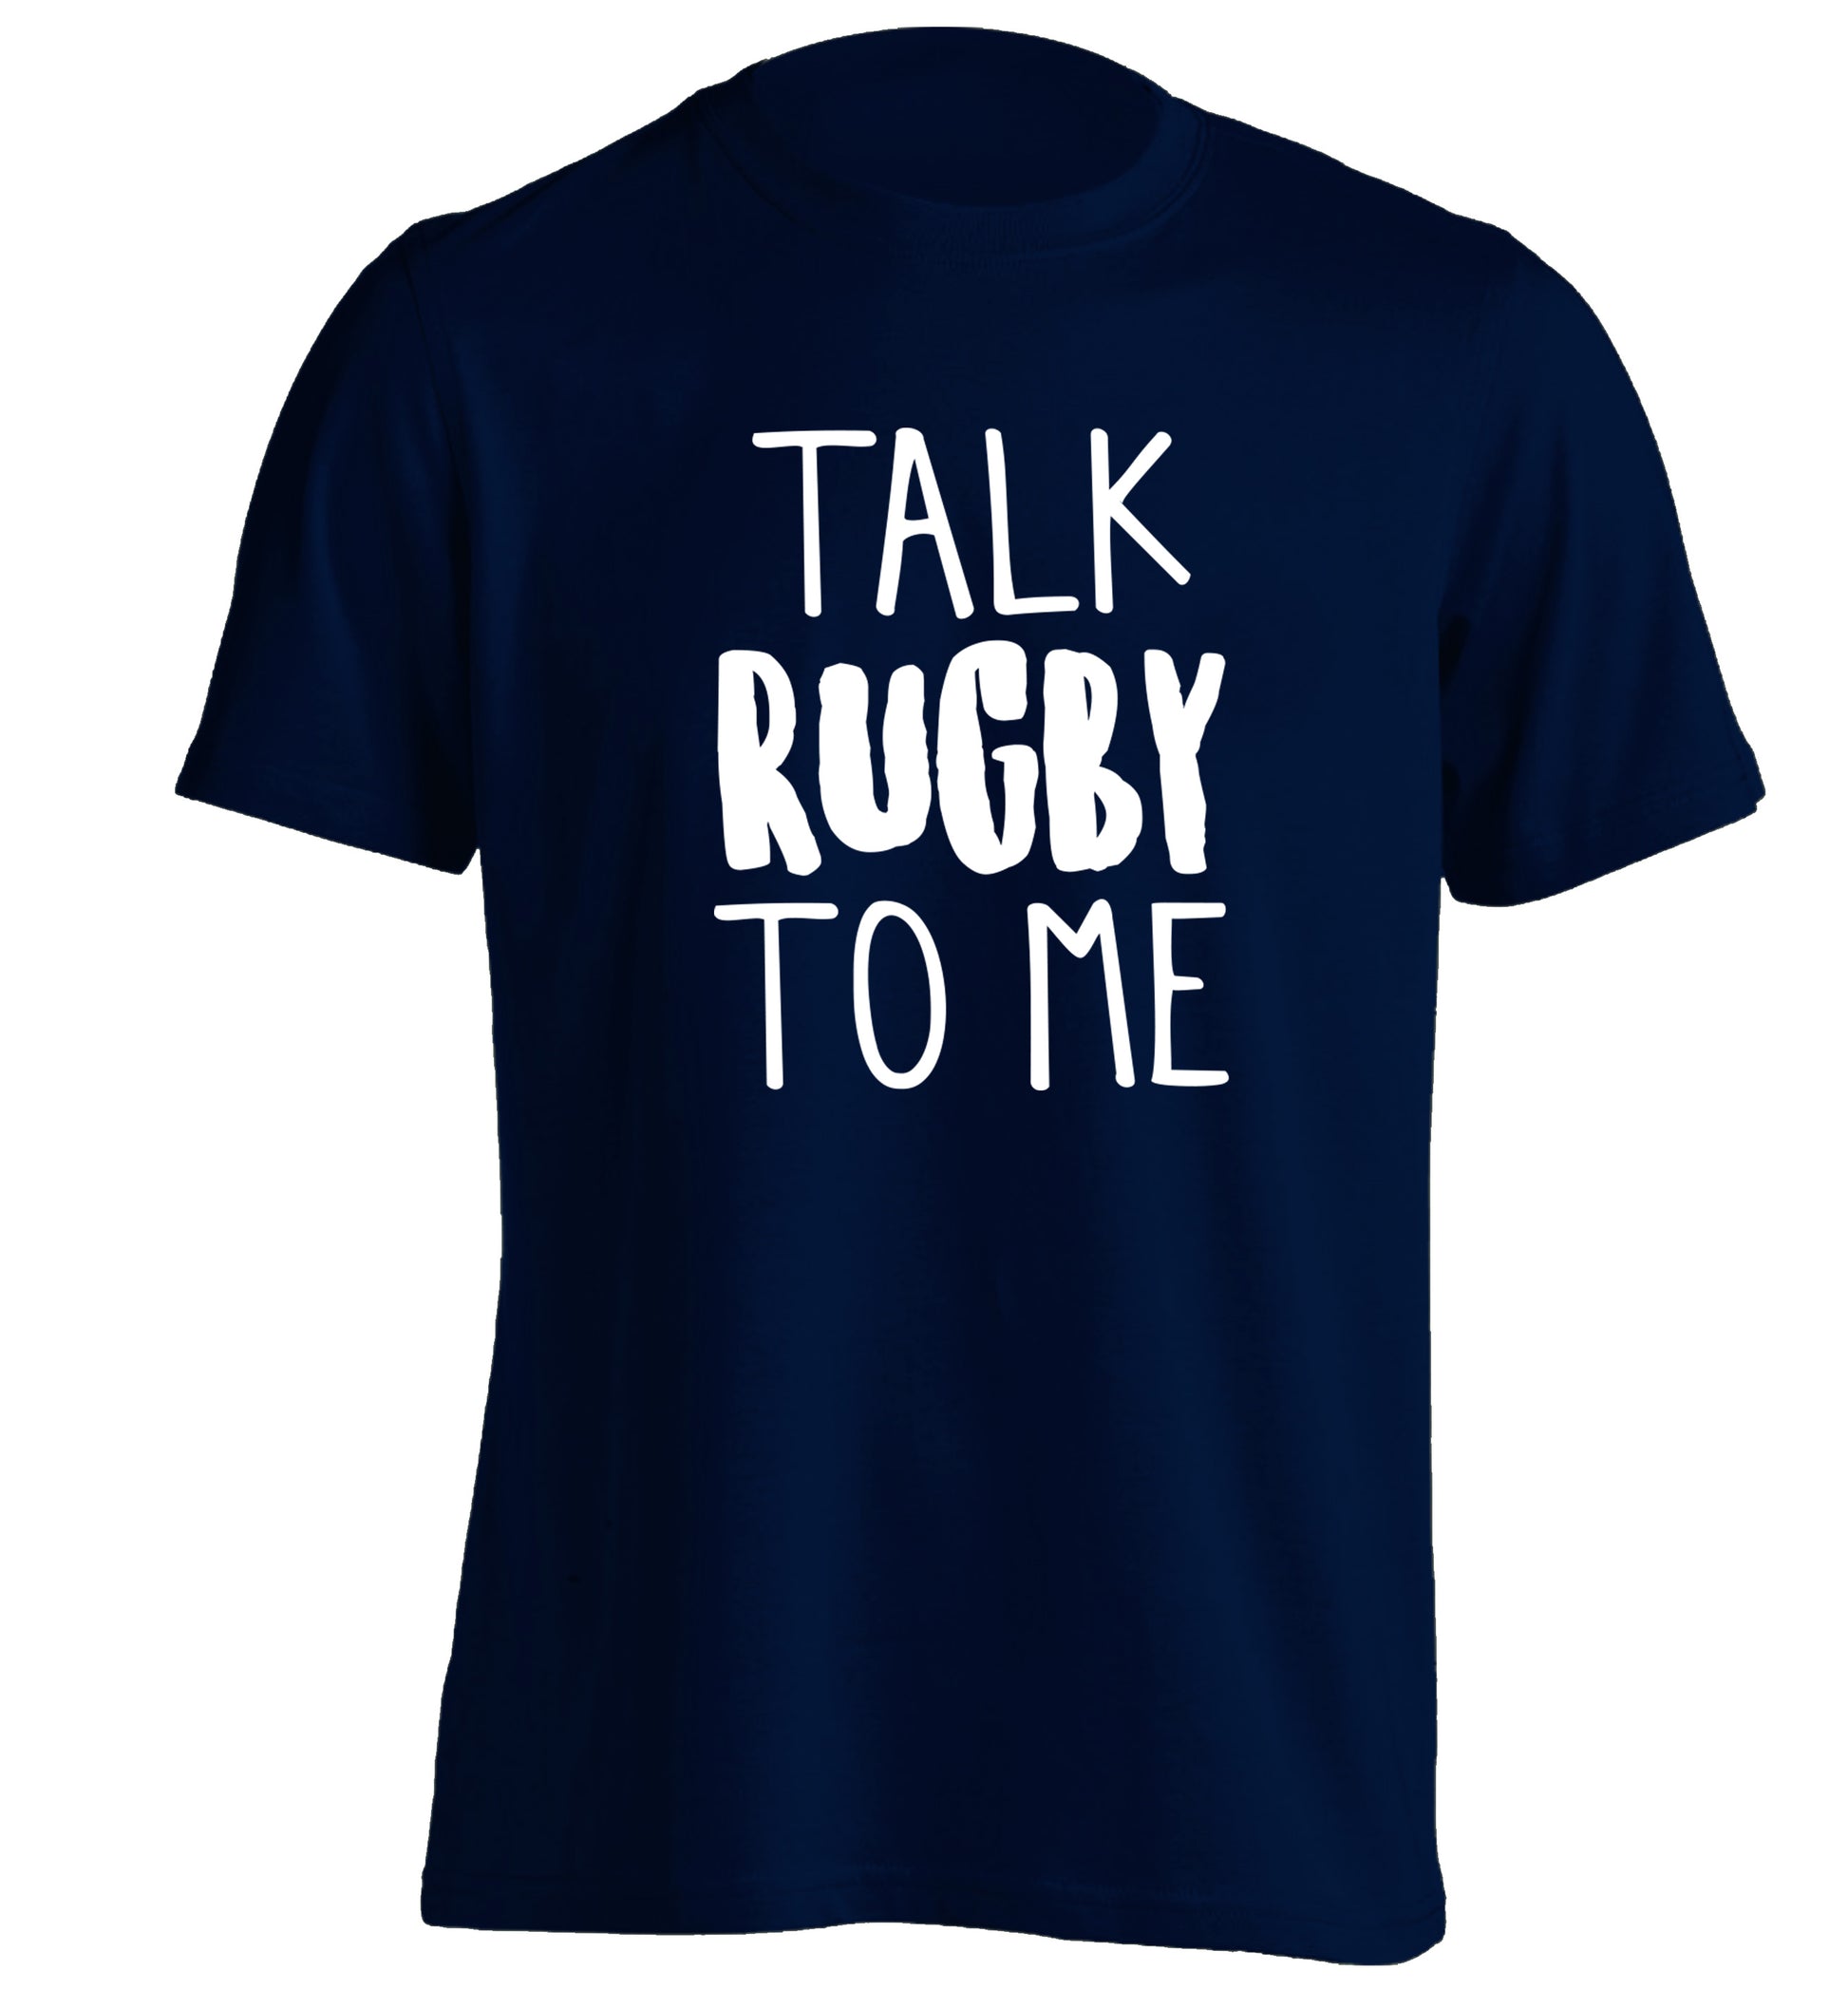 Talk rugby to me adults unisex navy Tshirt 2XL